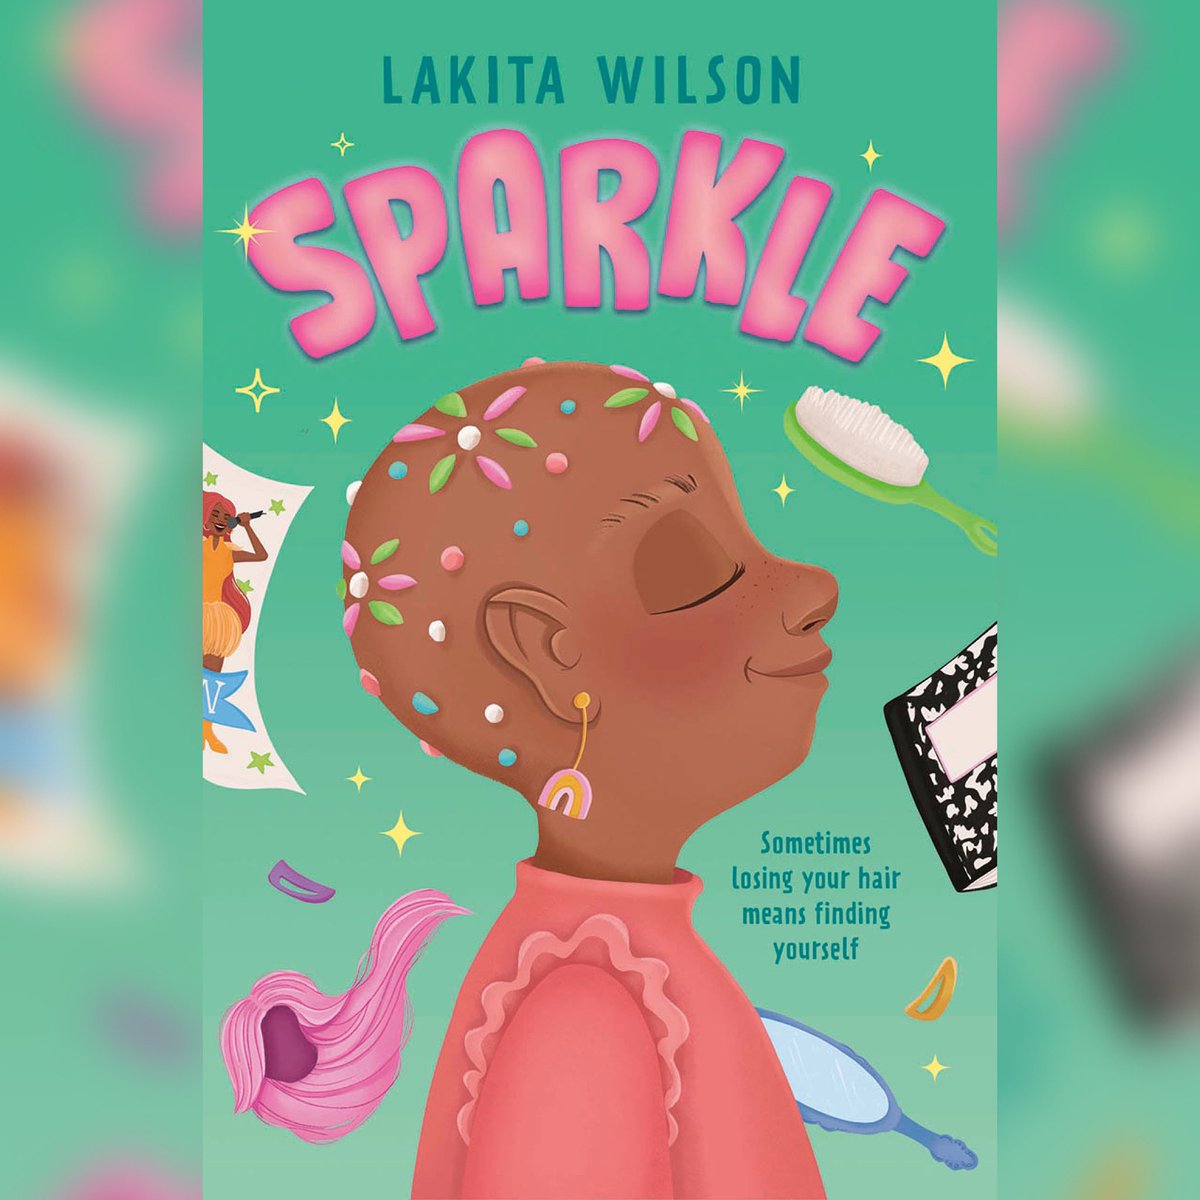 Did you know that adding SPARKLE to your Goodreads TBR list is a free way to increase this middle grade novels visibility? I would appreciate any RT’s to help put this on more teacher/librarian radars 💚 💚💚Here’s a link to SPARKLE’s Goodreads page ➡️goodreads.com/book/show/9058…